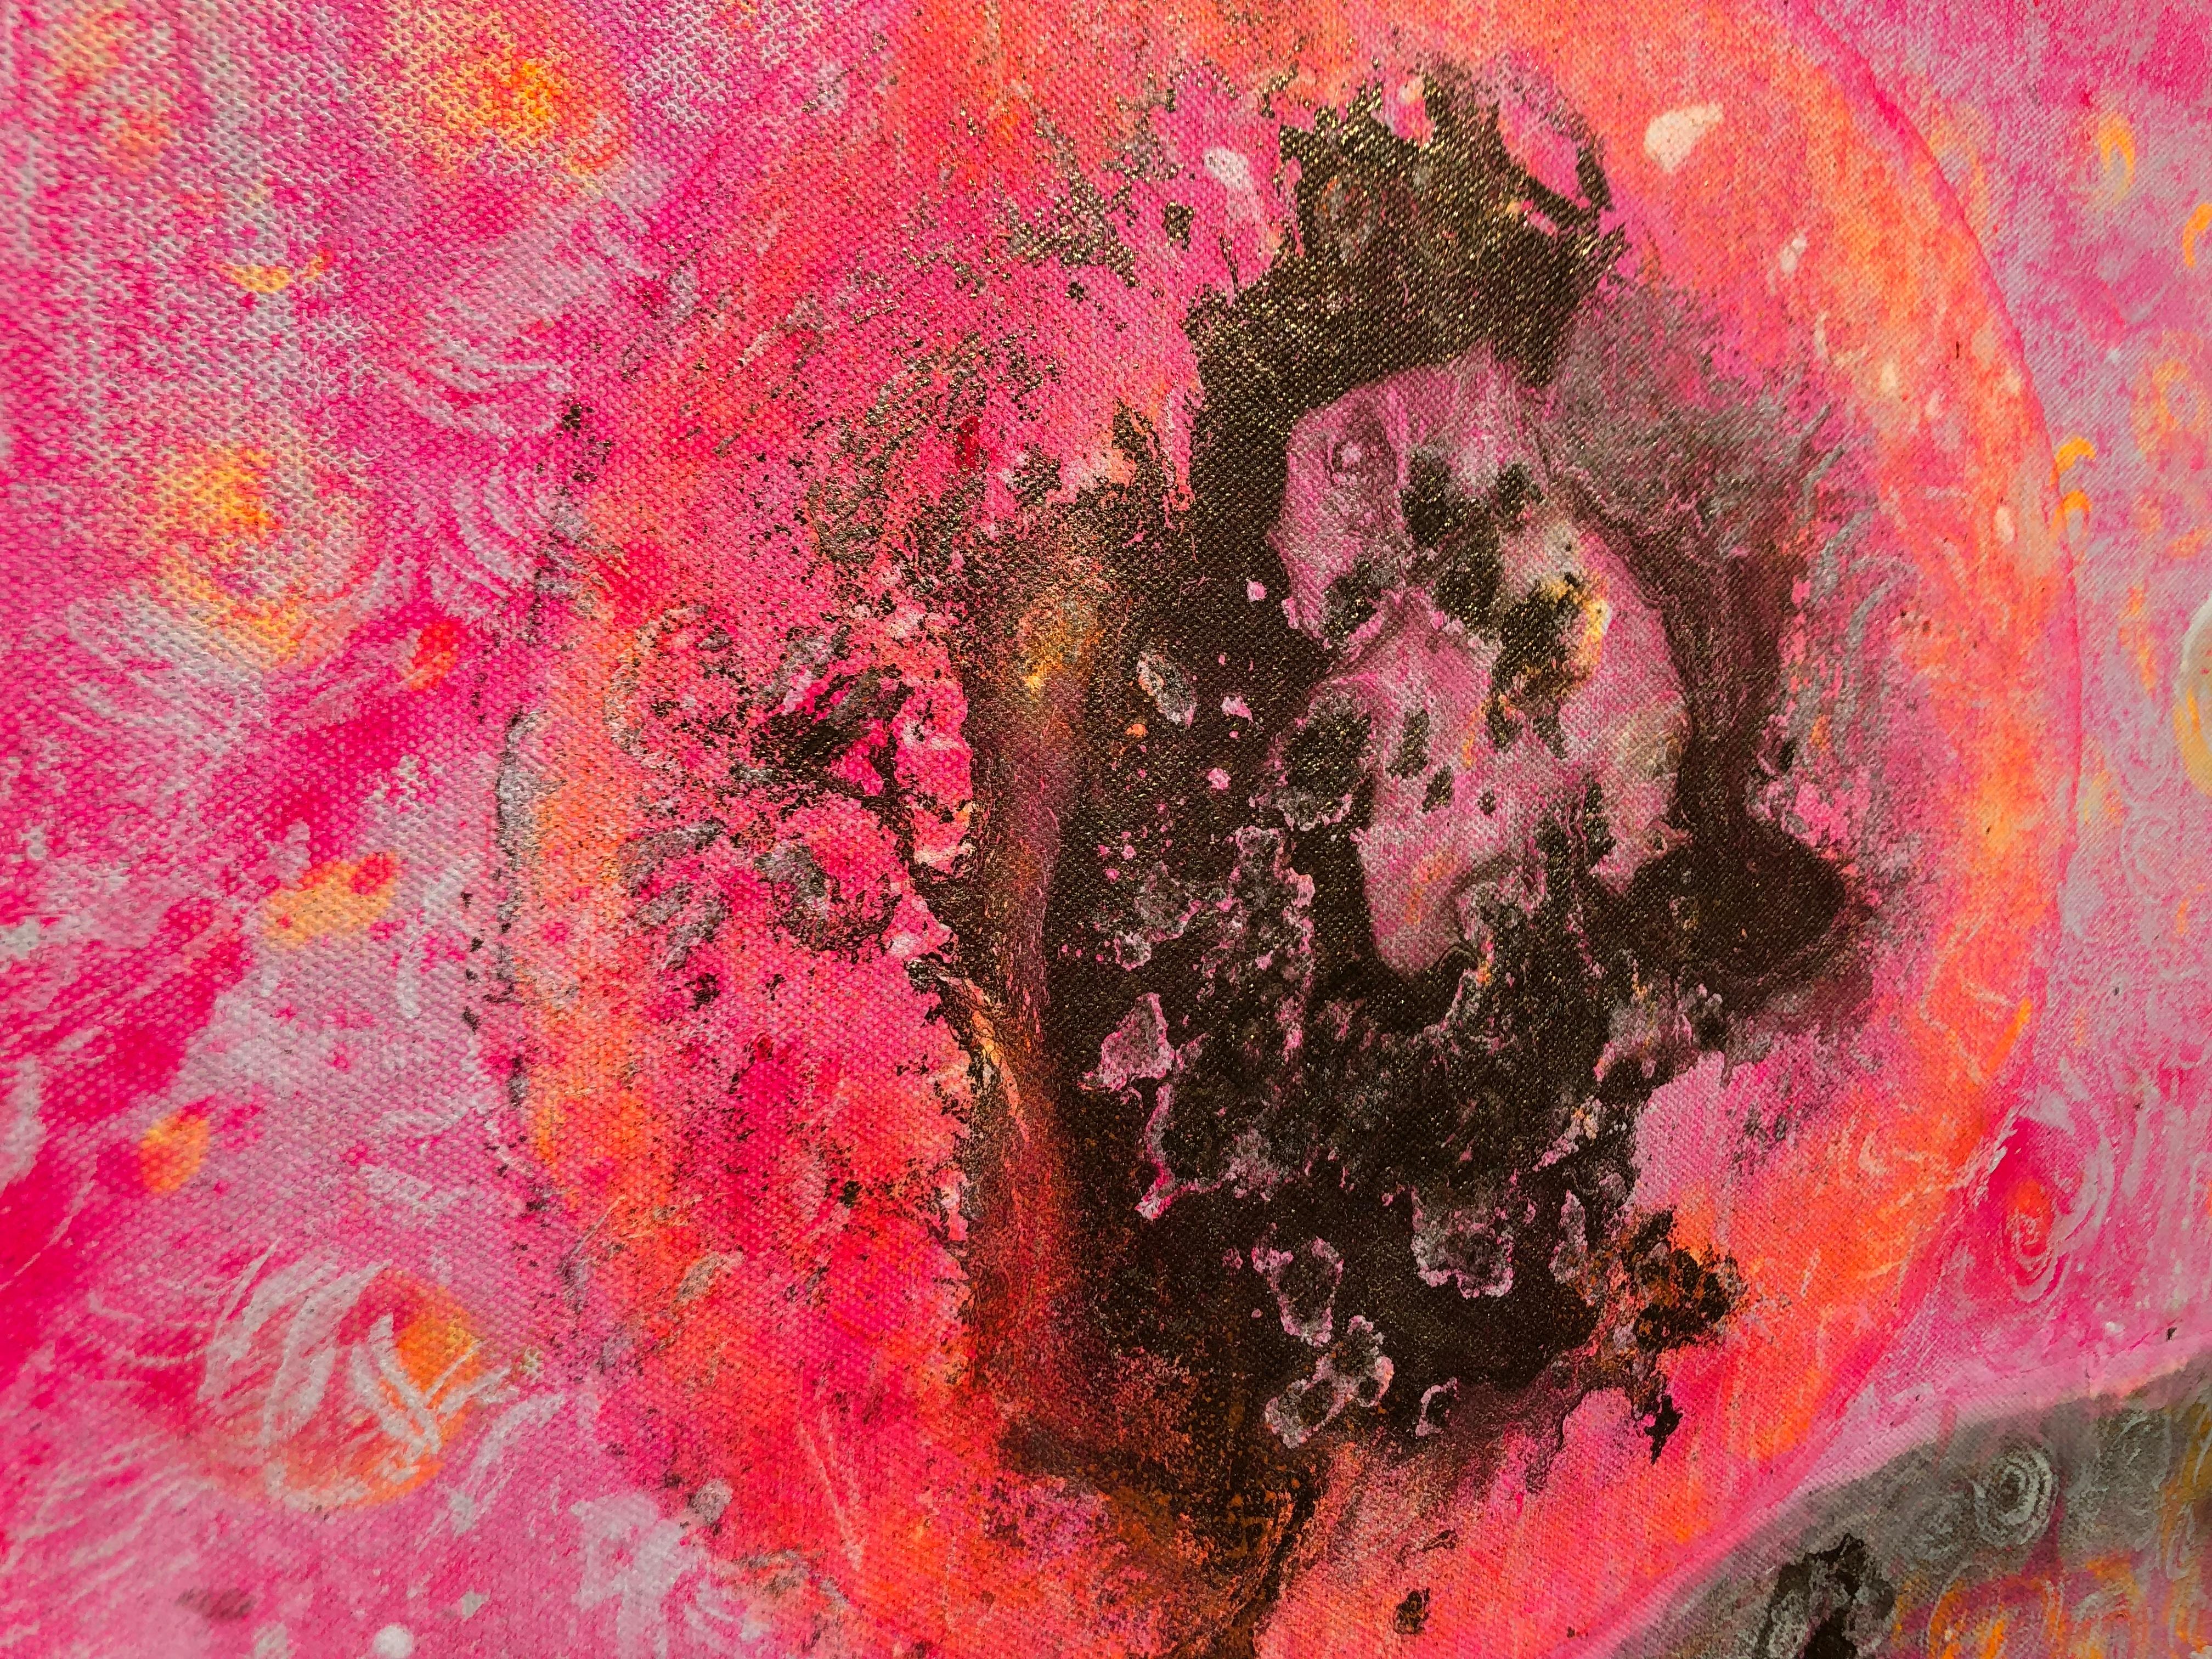 3 of 4 Painting on canvas, abstract metaphysical, gold, pink fluorescent 